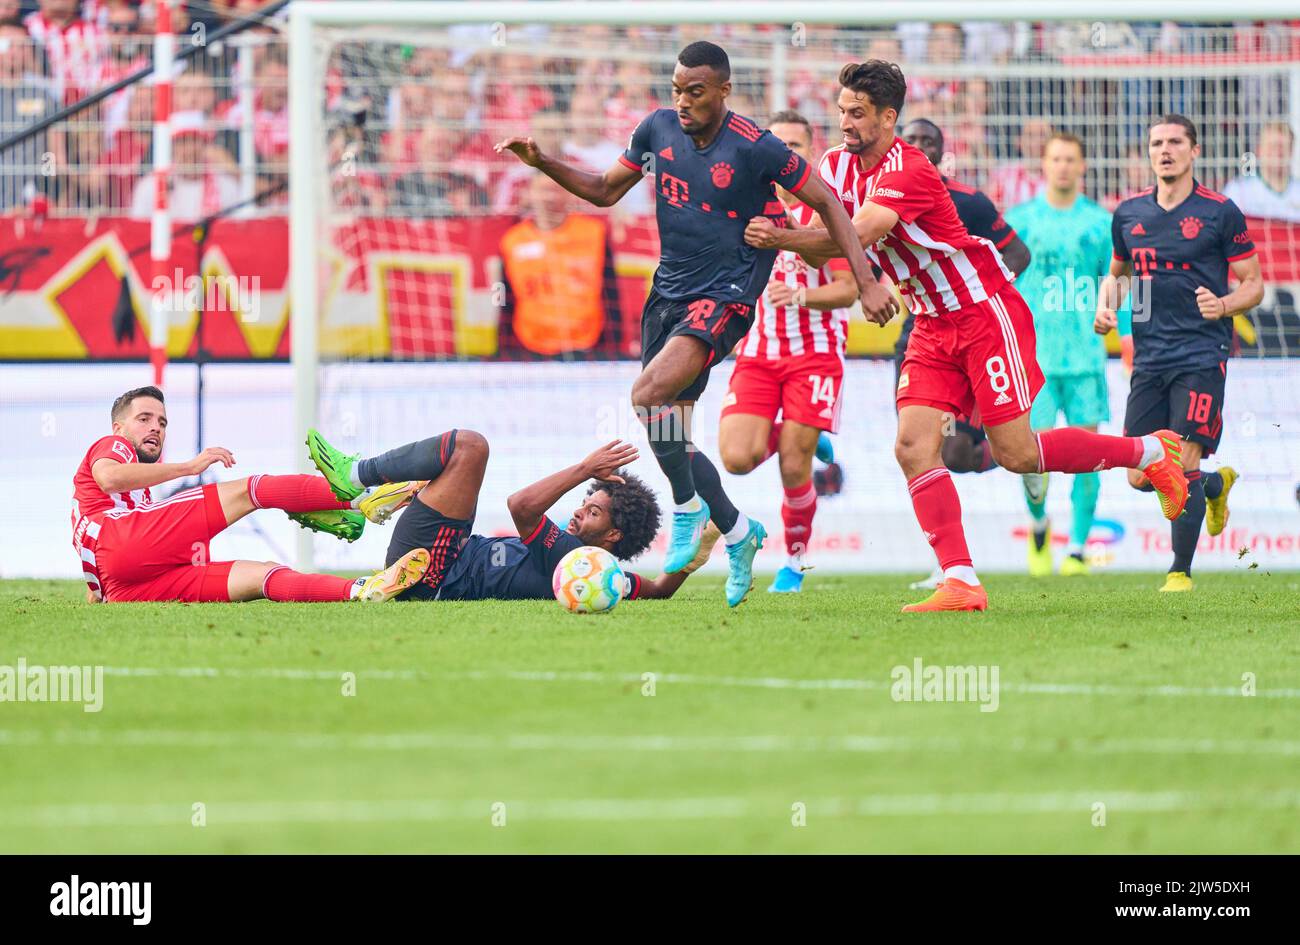 Serge GNABRY, FCB 7  Ryan Gravenberch, FCB 38 compete for the ball, tackling, duel, header, zweikampf, action, fight against Niko Giesselmann, Union Berlin 23 (L) and Rani Khedira, Union Berlin 8 (R) in the match 1.FC UNION BERLIN - FC BAYERN MUENCHEN 1-1 1.German Football League on Sept 3, 2022 in Berlin, Germany. Season 2022/2023, matchday 5, 1.Bundesliga, FCB, München, 5.Spieltag. © Peter Schatz / Alamy Live News    - DFL REGULATIONS PROHIBIT ANY USE OF PHOTOGRAPHS as IMAGE SEQUENCES and/or QUASI-VIDEO - Stock Photo